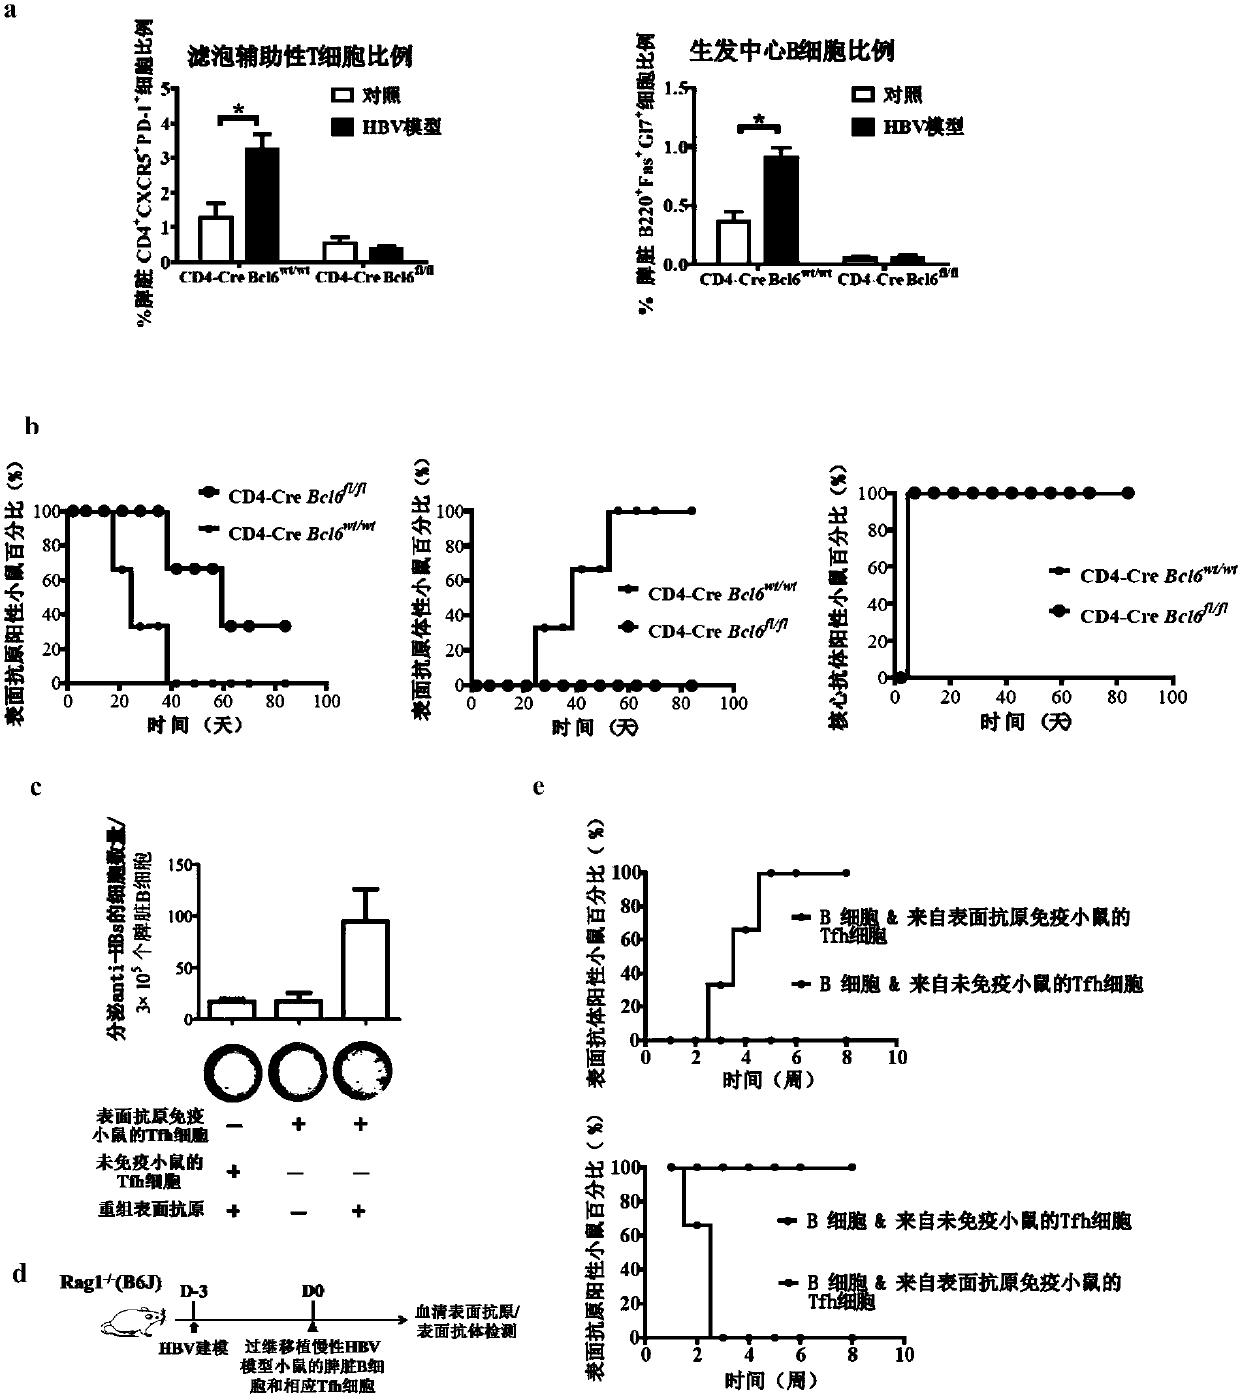 Application of substances capable of inhibiting activity of Treg cells and promoting differentiation of Tfh cells in treating HBV infection